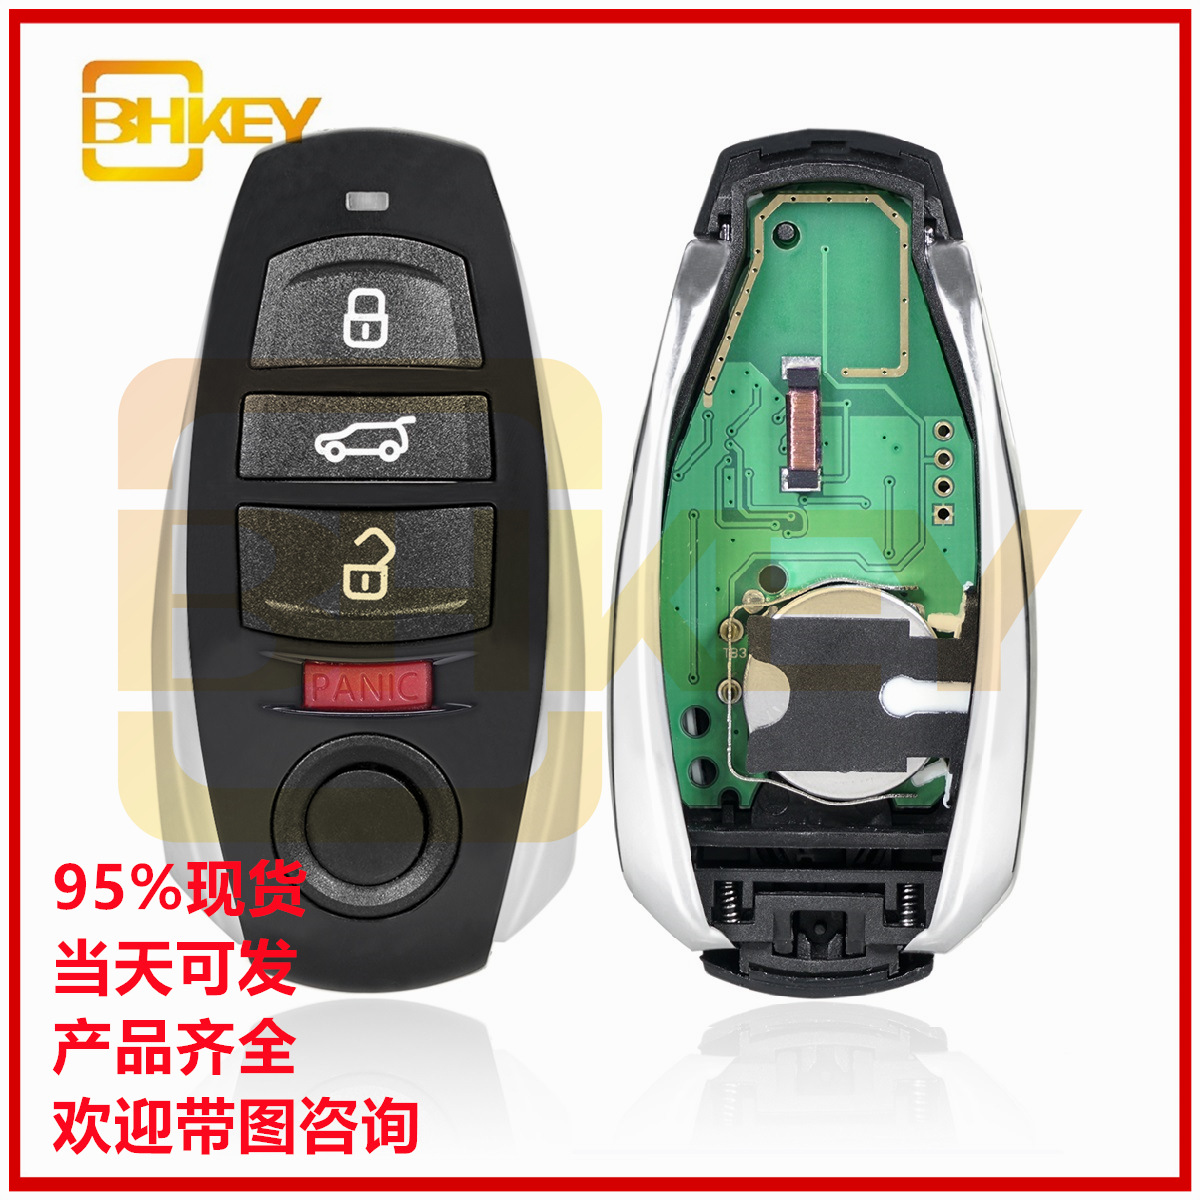 Fit for Volkswagen 3 1 key semi-smart car key 315/433/868 frequency PFC7945 chip